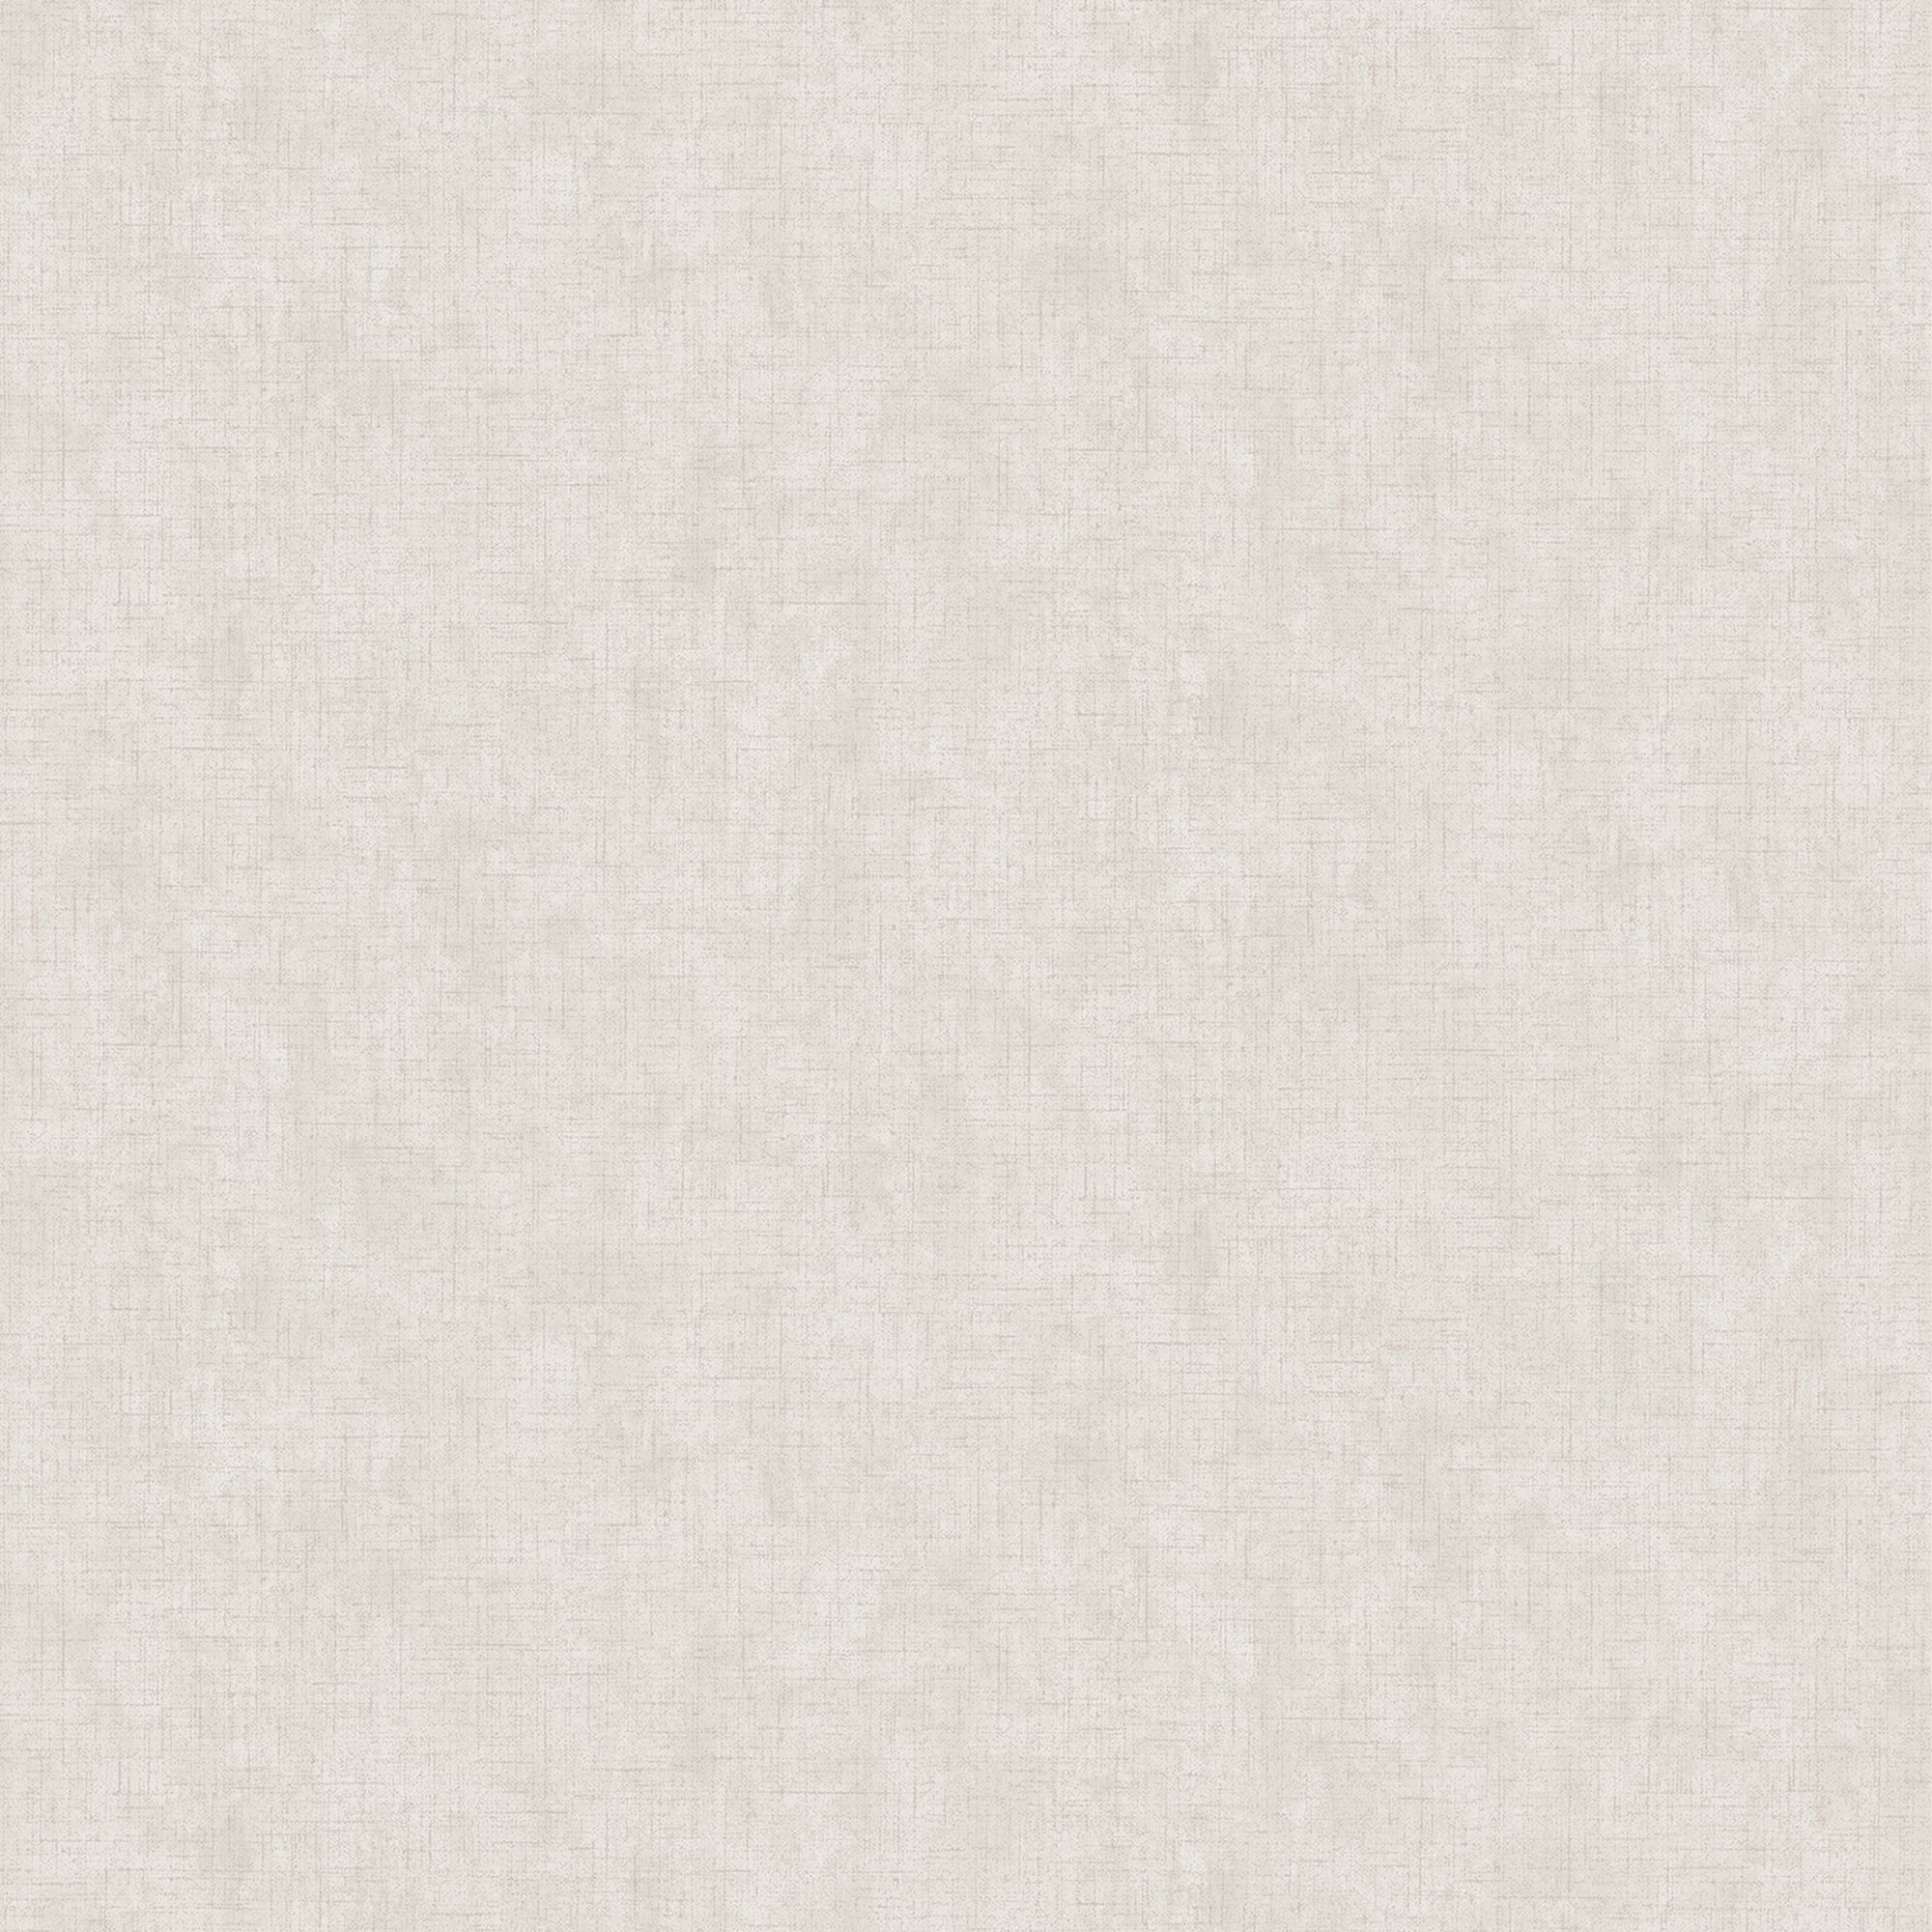 Laura Ashley Plains Pale Dove Grey Smooth Wallpaper